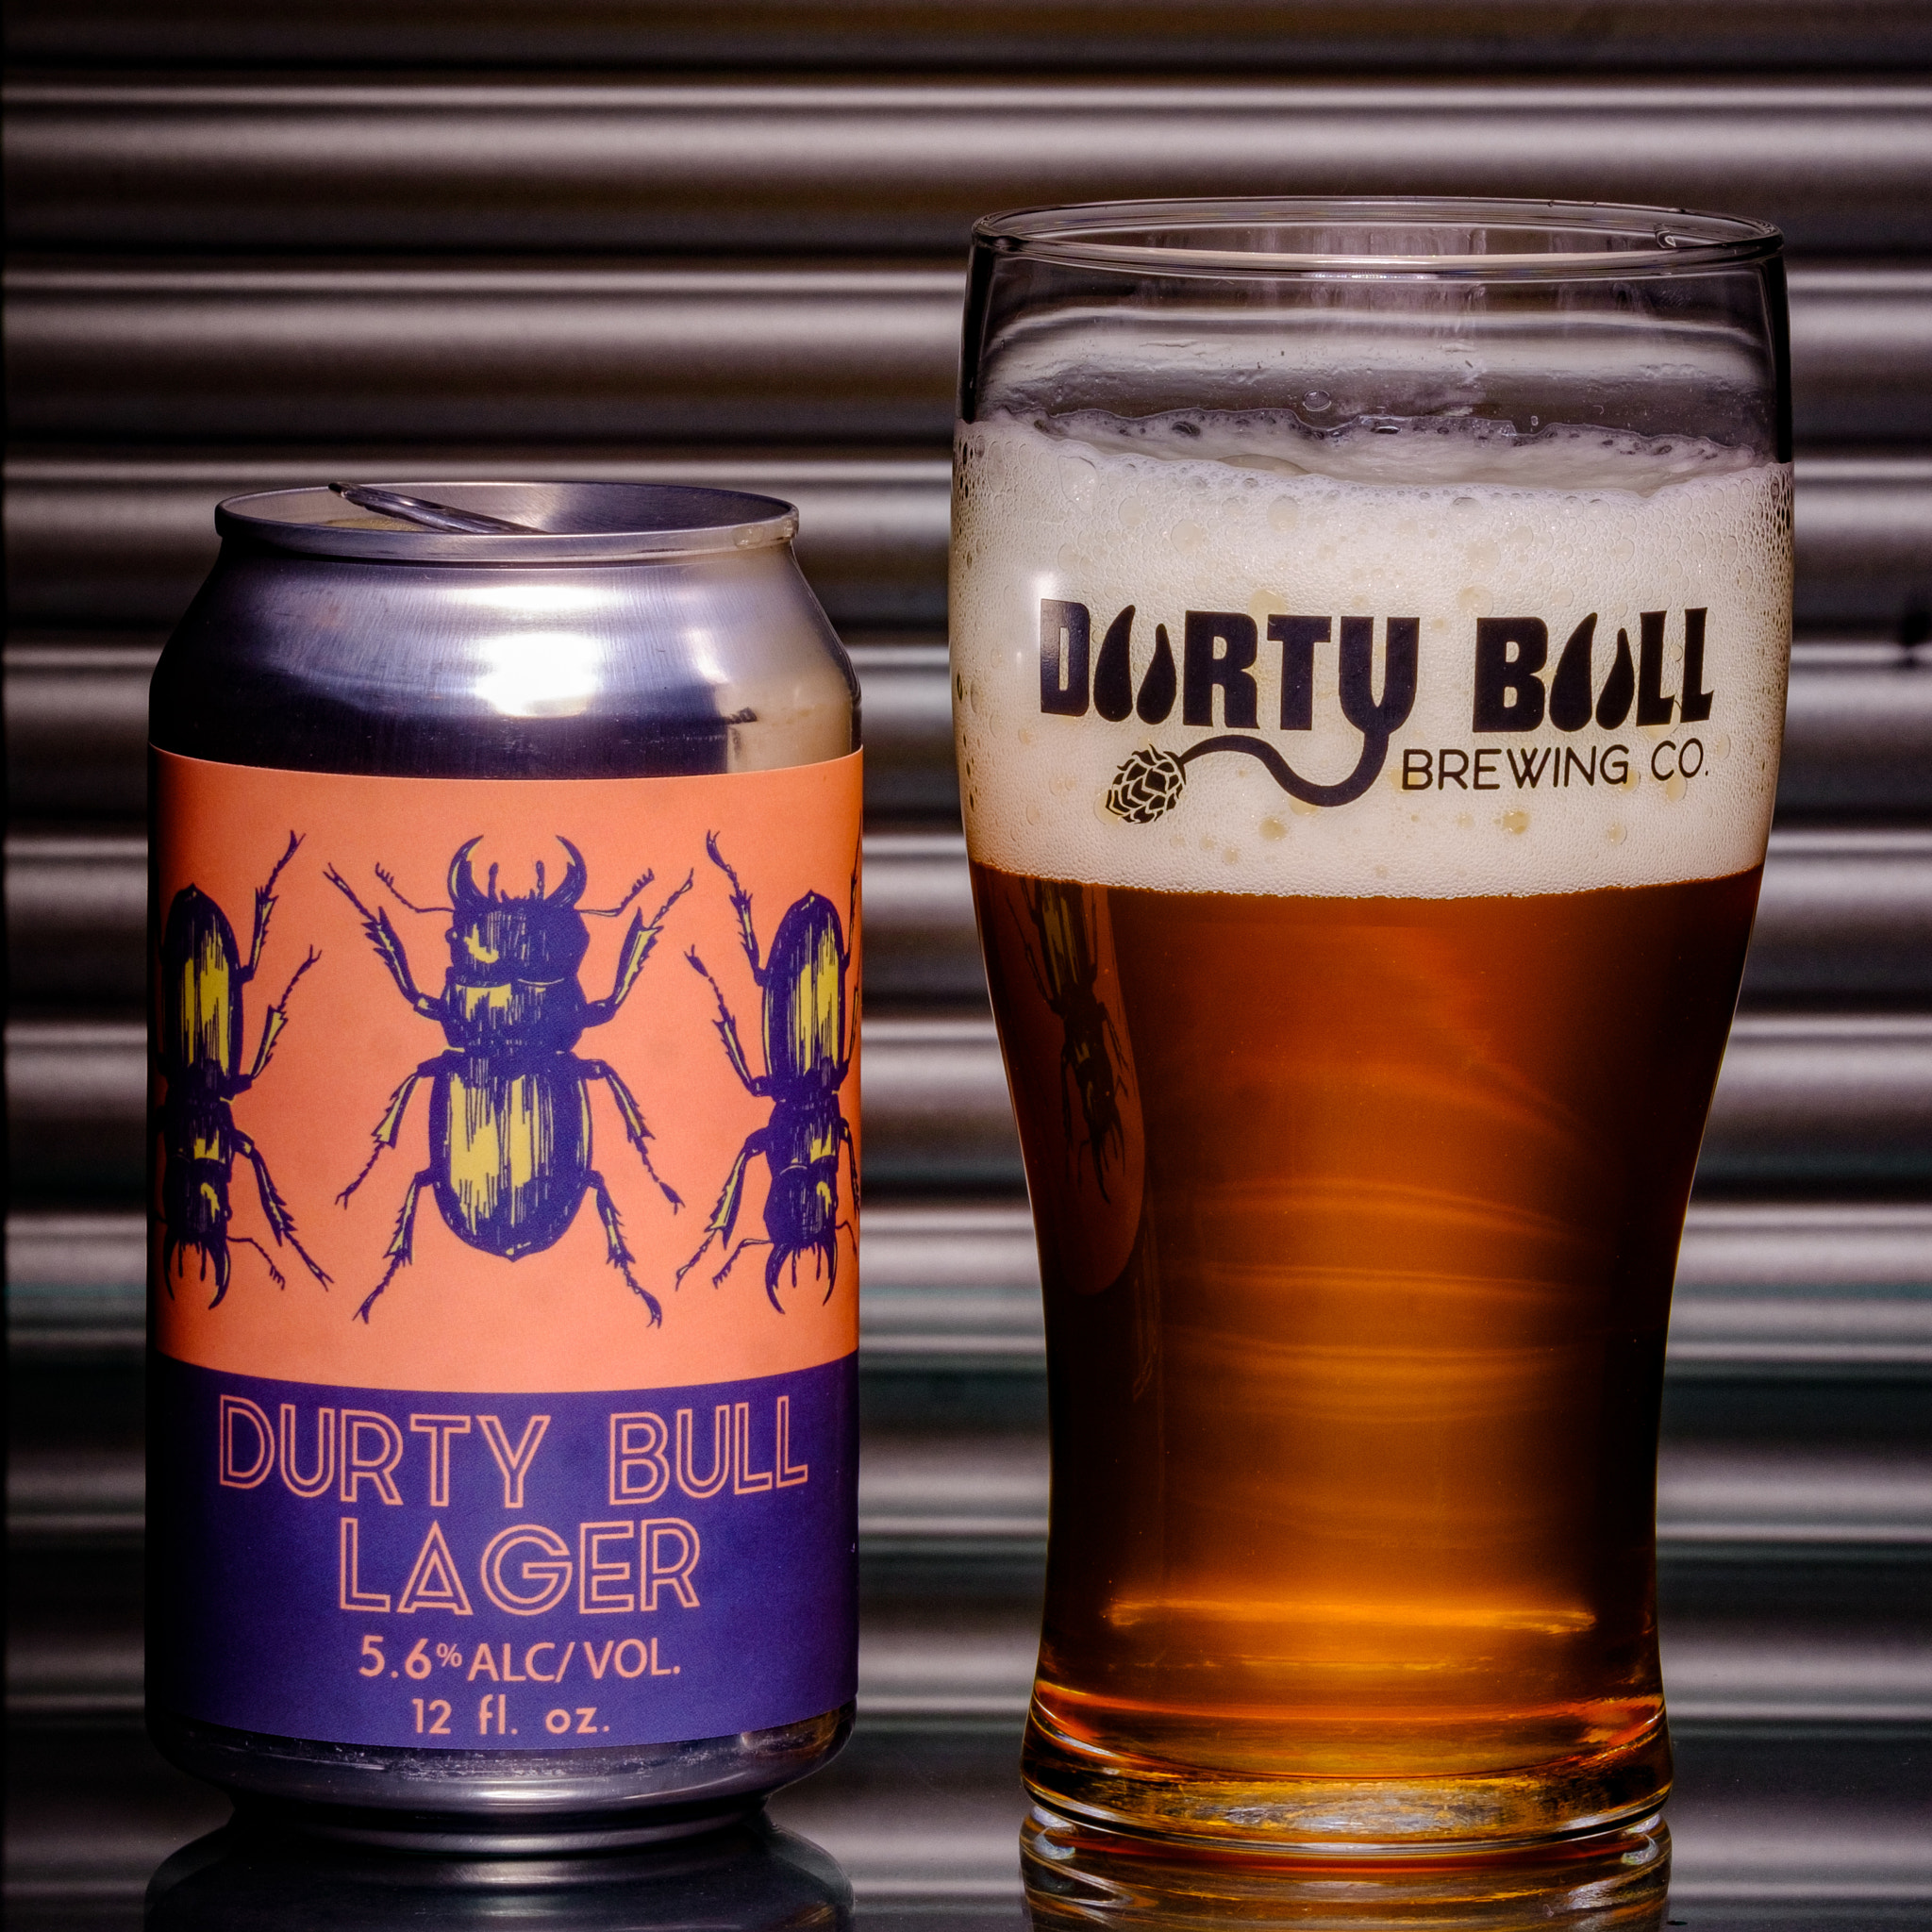 Fujifilm XF 90mm F2 R LM WR sample photo. Durty bull lager photography